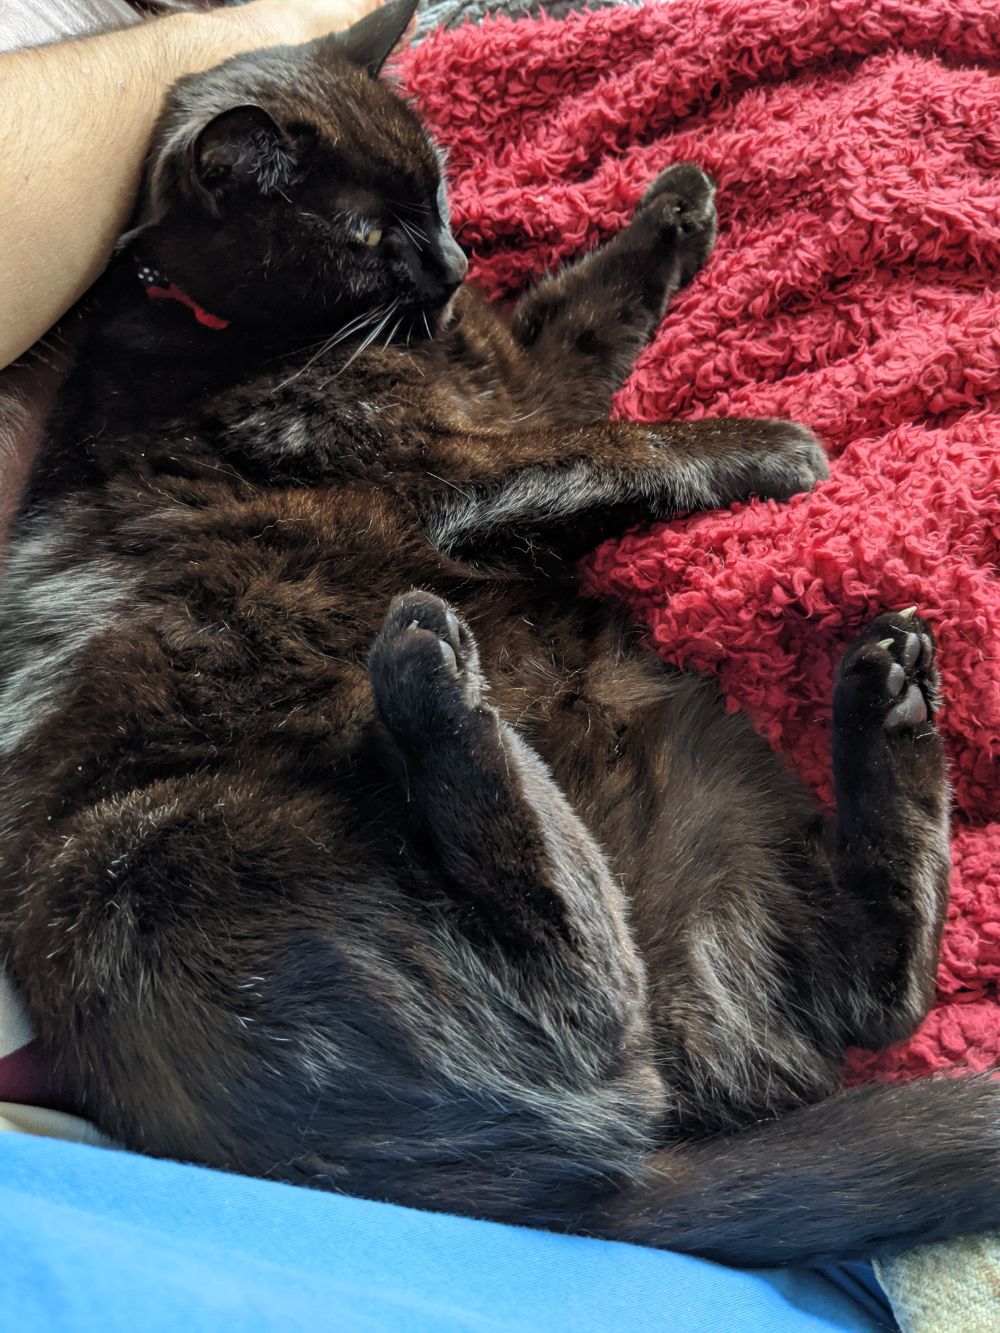 Black cat laying on a red blanket on his back, in an unflattering angle that makes him look rather chonky